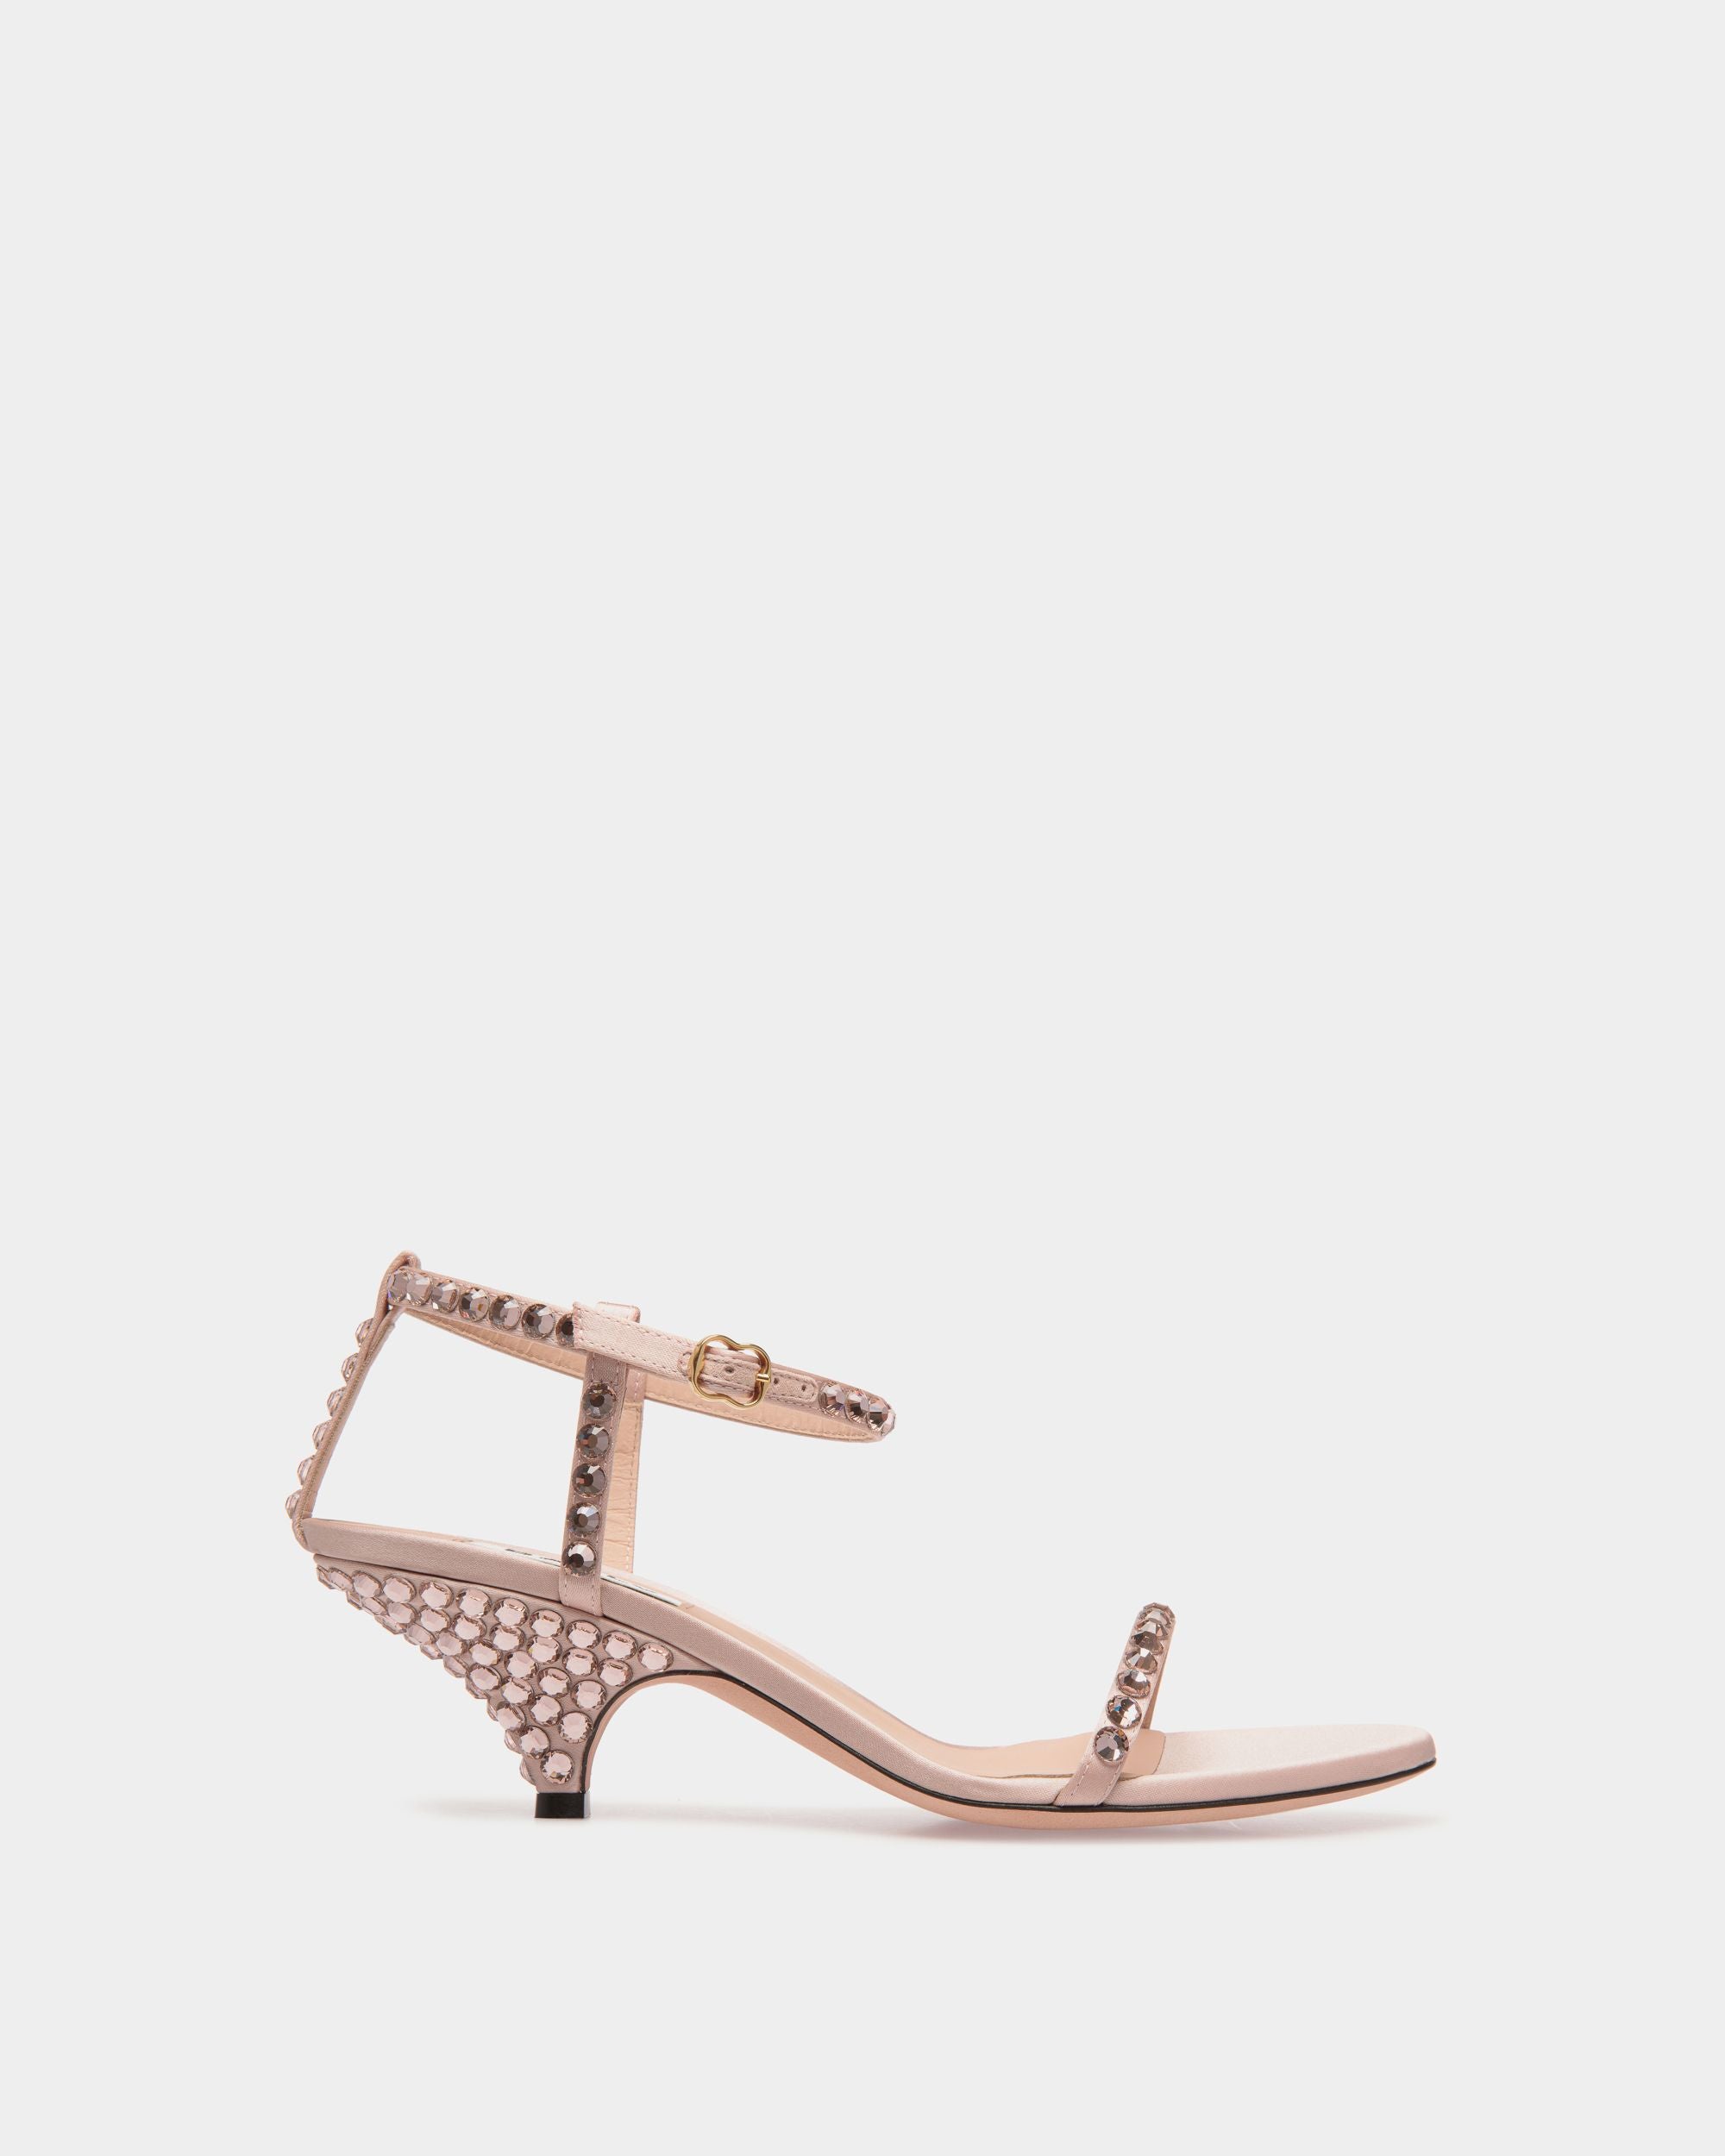 Katy | Women's Heeled Sandal in Light Pink Fabric with Crystals | Bally | Still Life Side